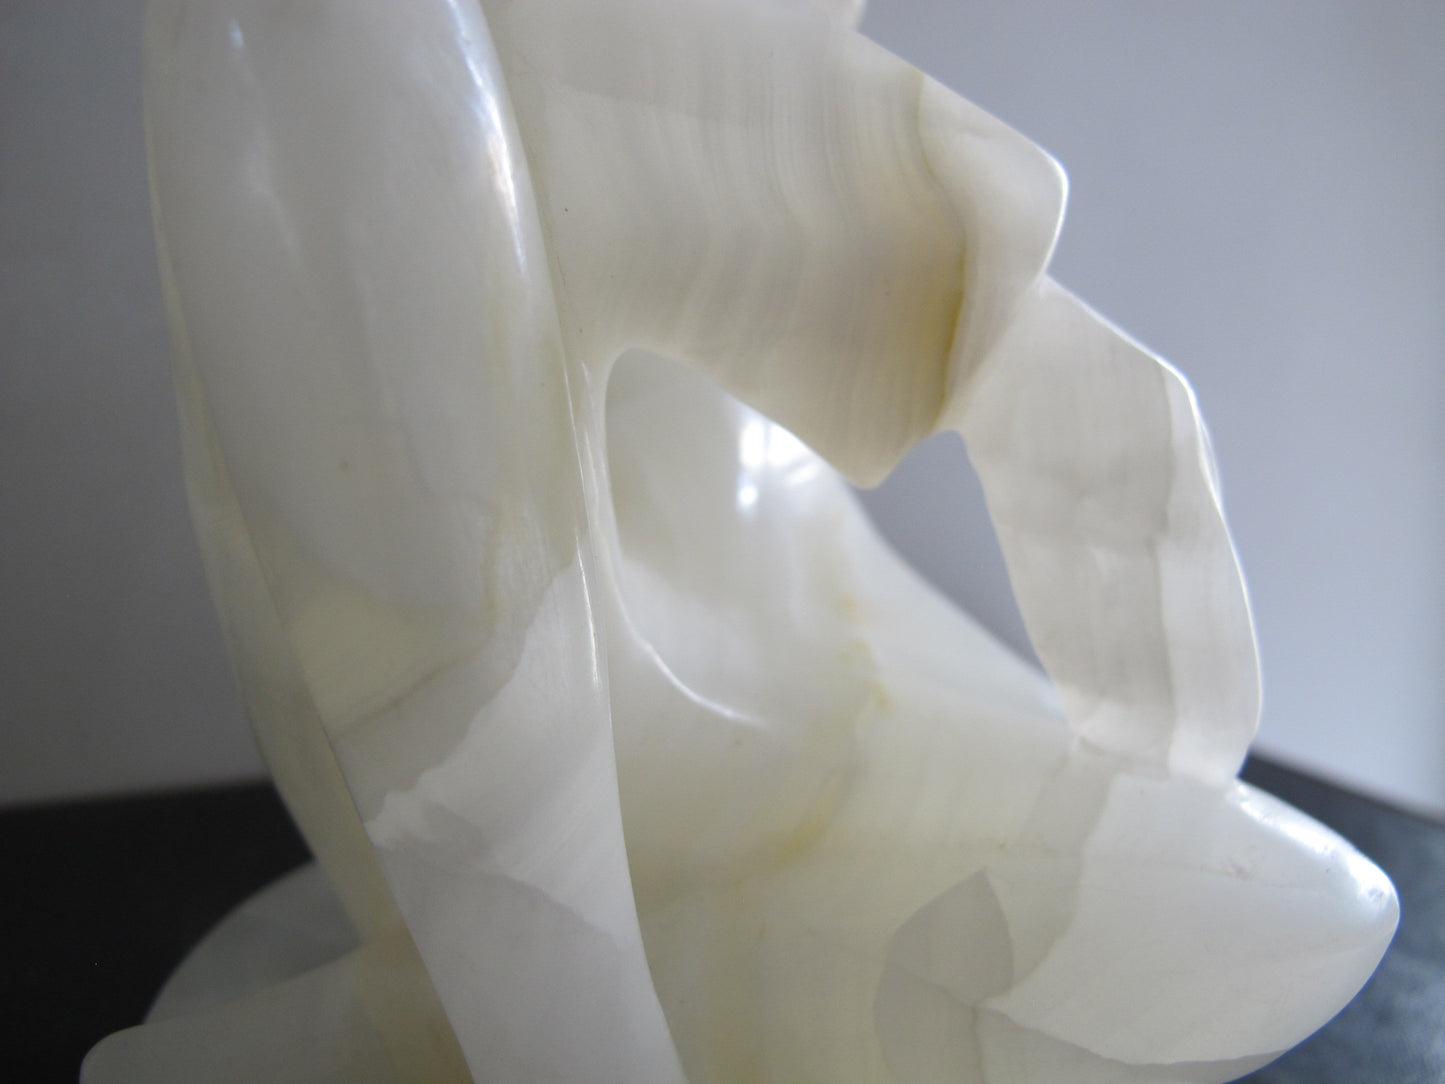 Sculpture Translucent White Alabaster Marble MCM Midcentury Italian Woman Abstract 1950s 1960s